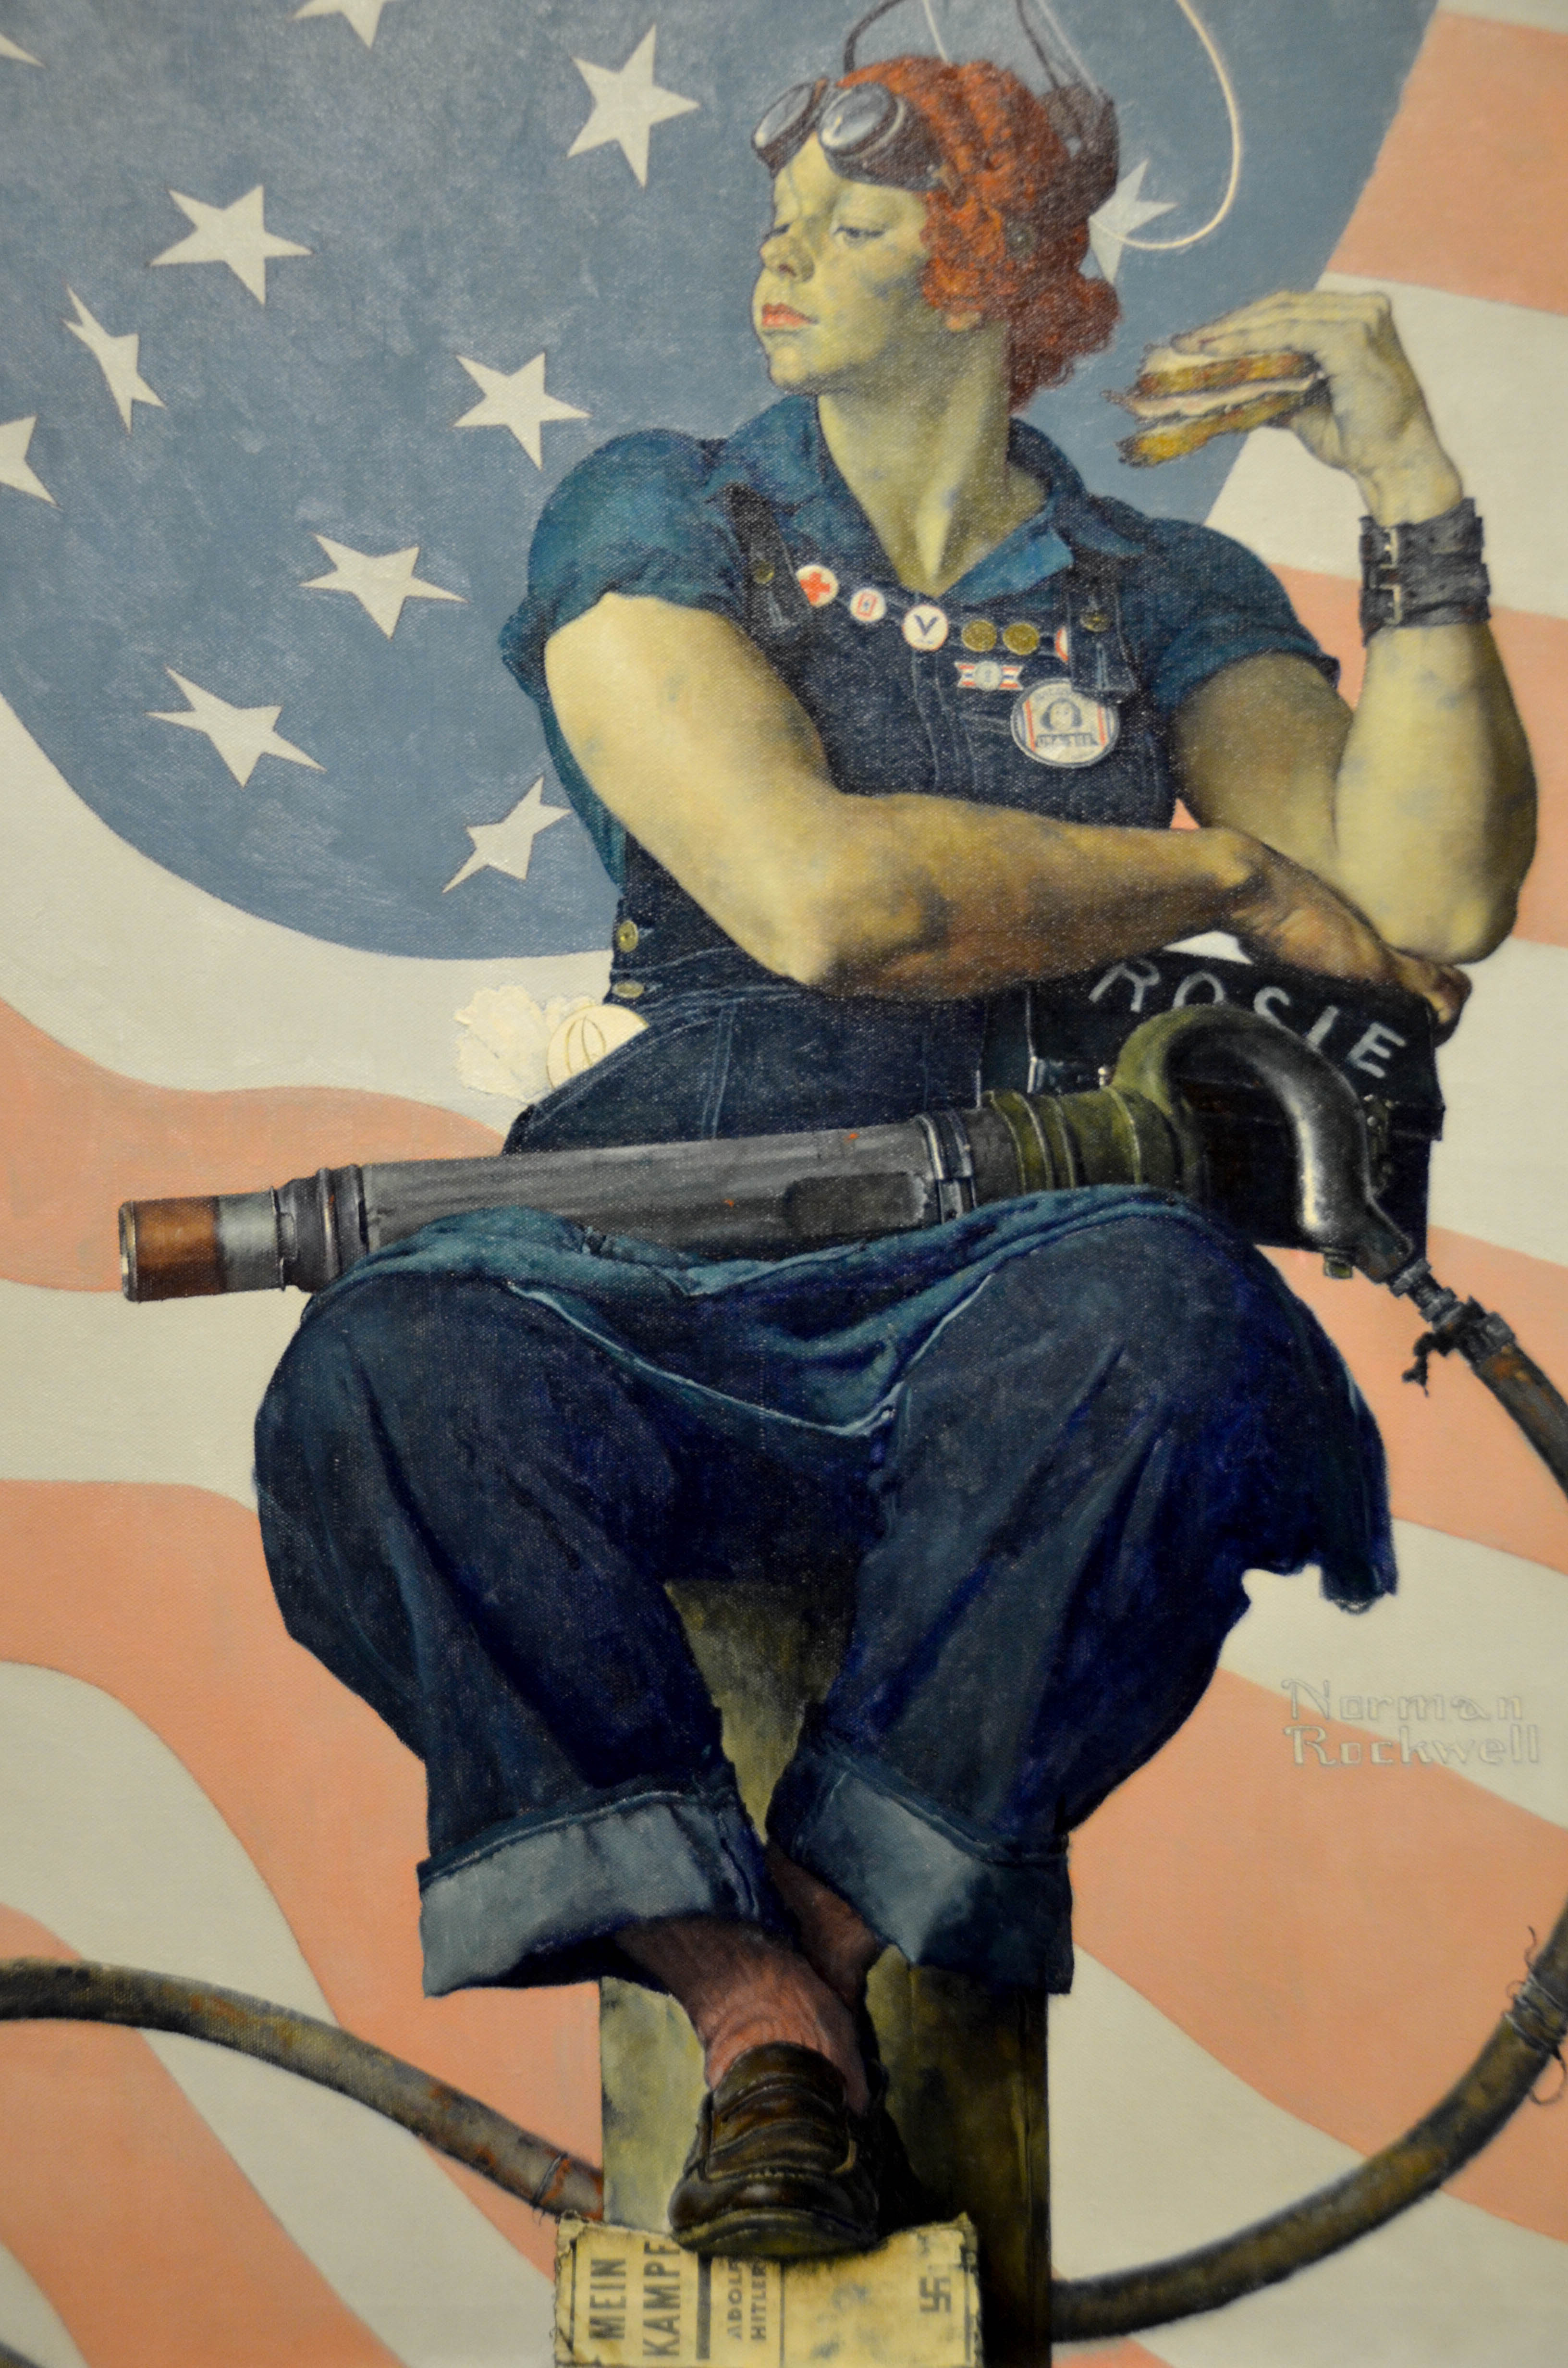 "Rosie the Riveter" by Norman Rockwell.